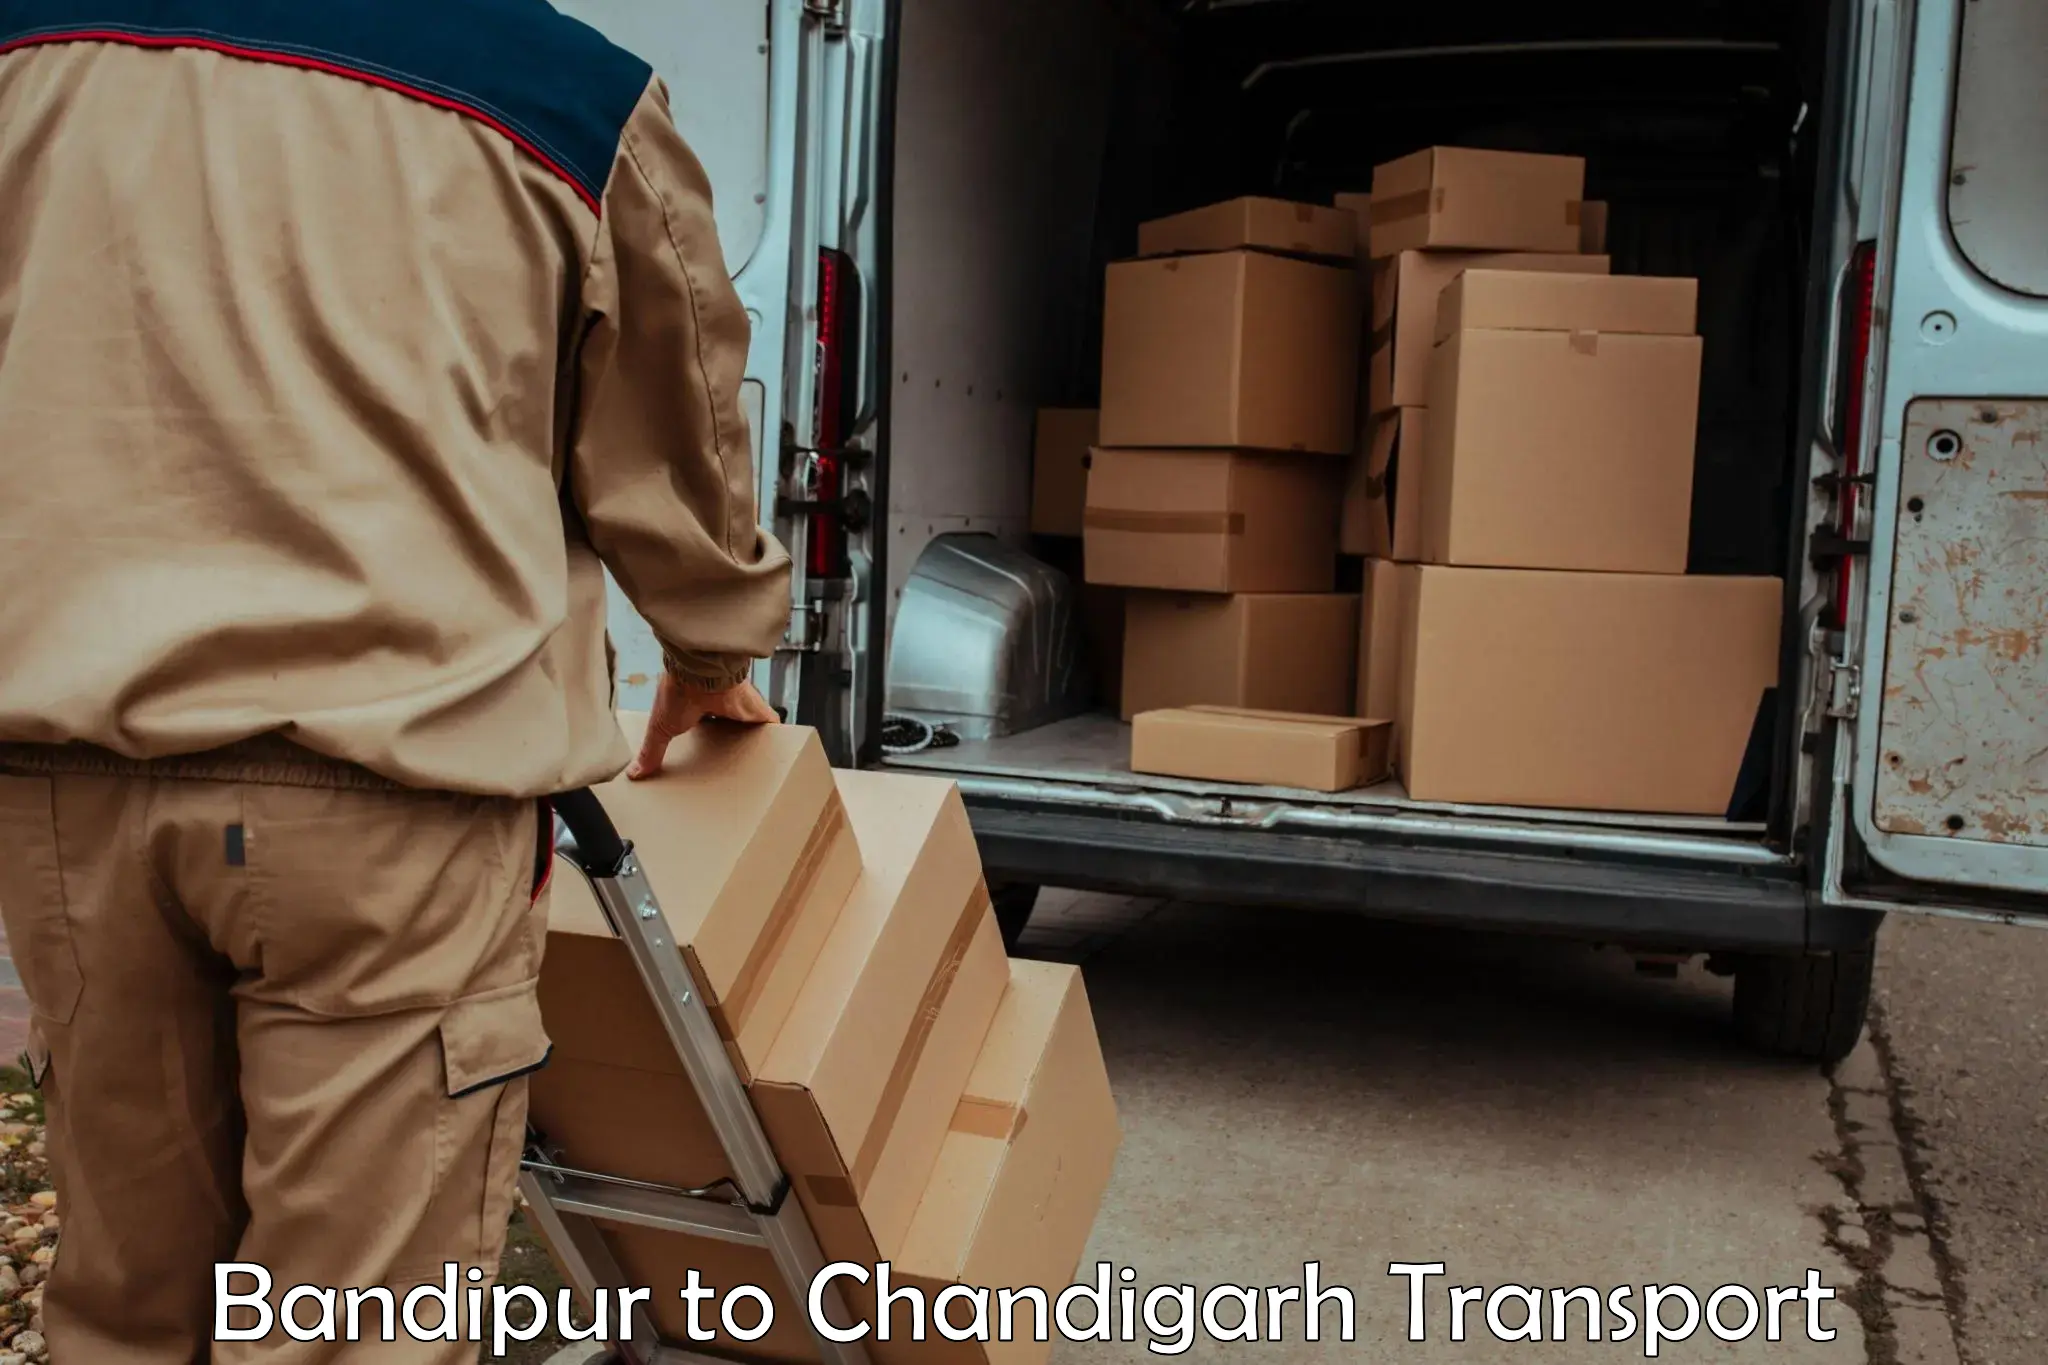 Air freight transport services Bandipur to Chandigarh